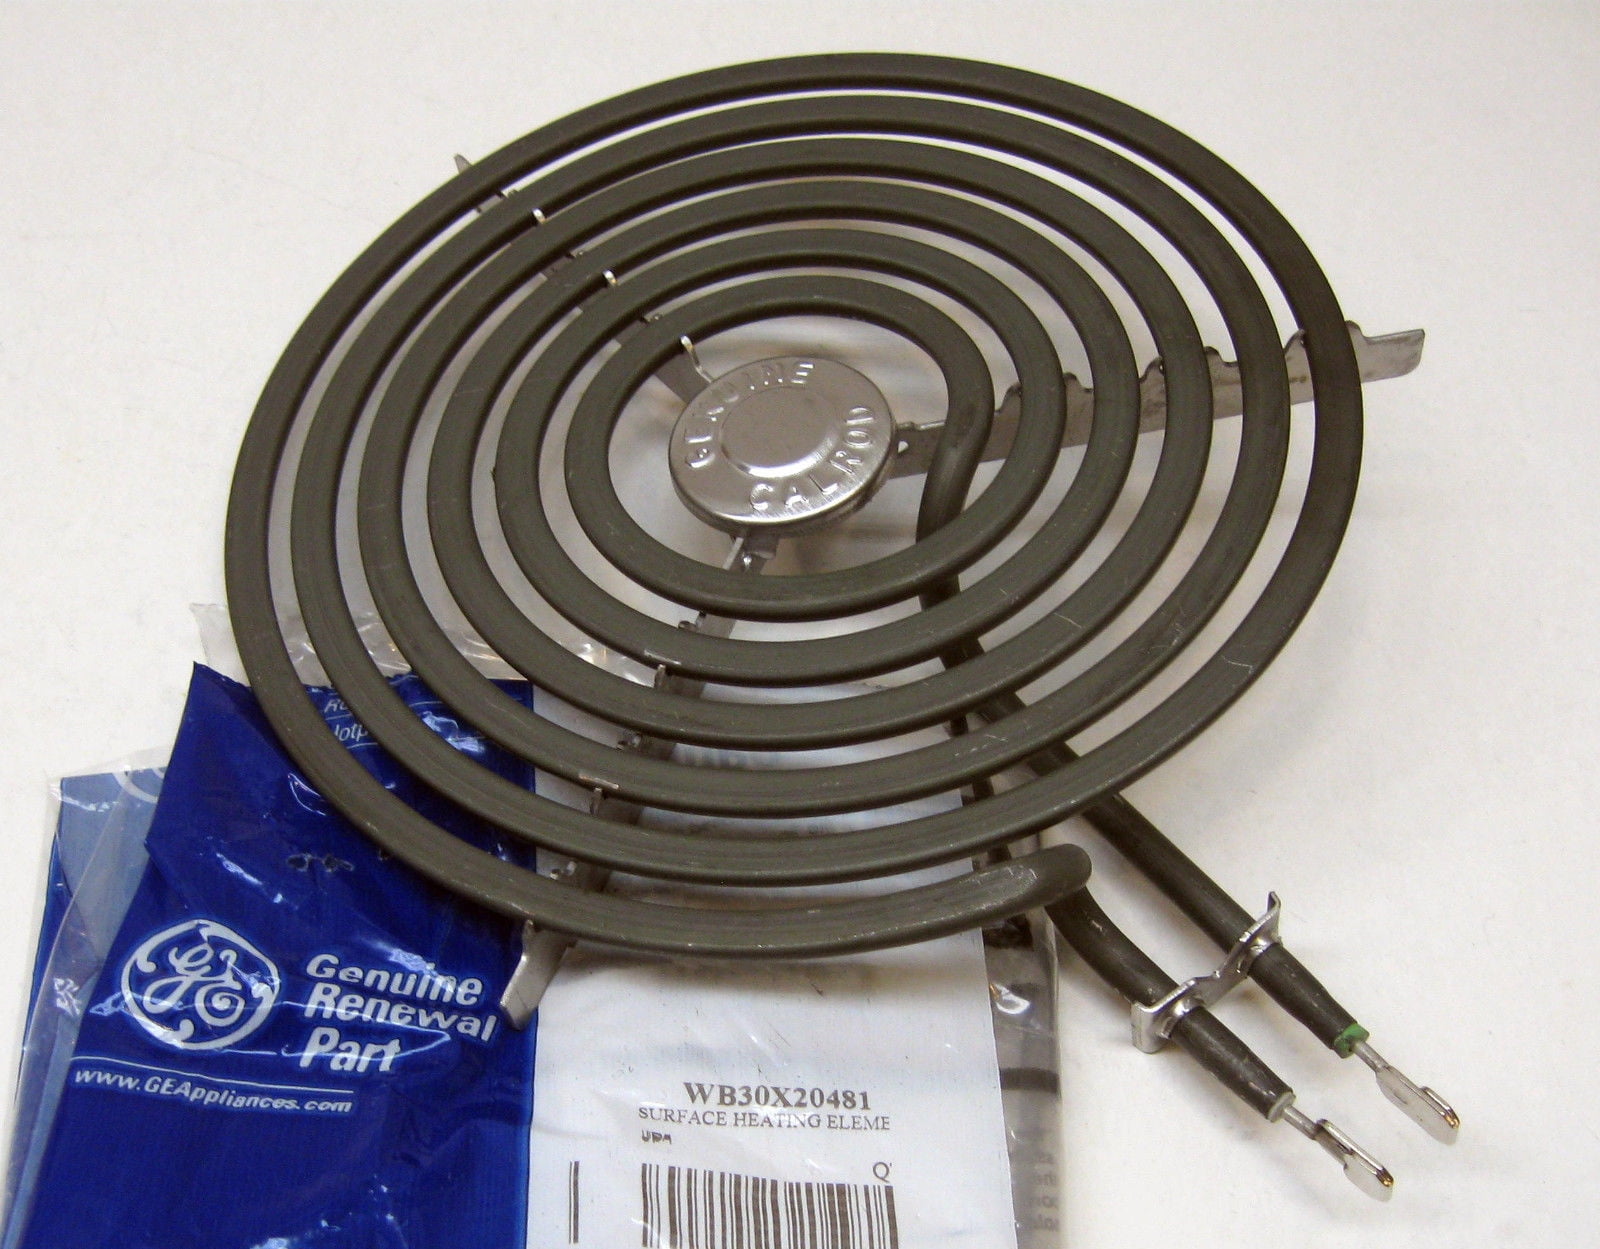 Oven Range Surface Burner Element 8" Replaces GE Kenmore # PS8768336 WB30T10031 